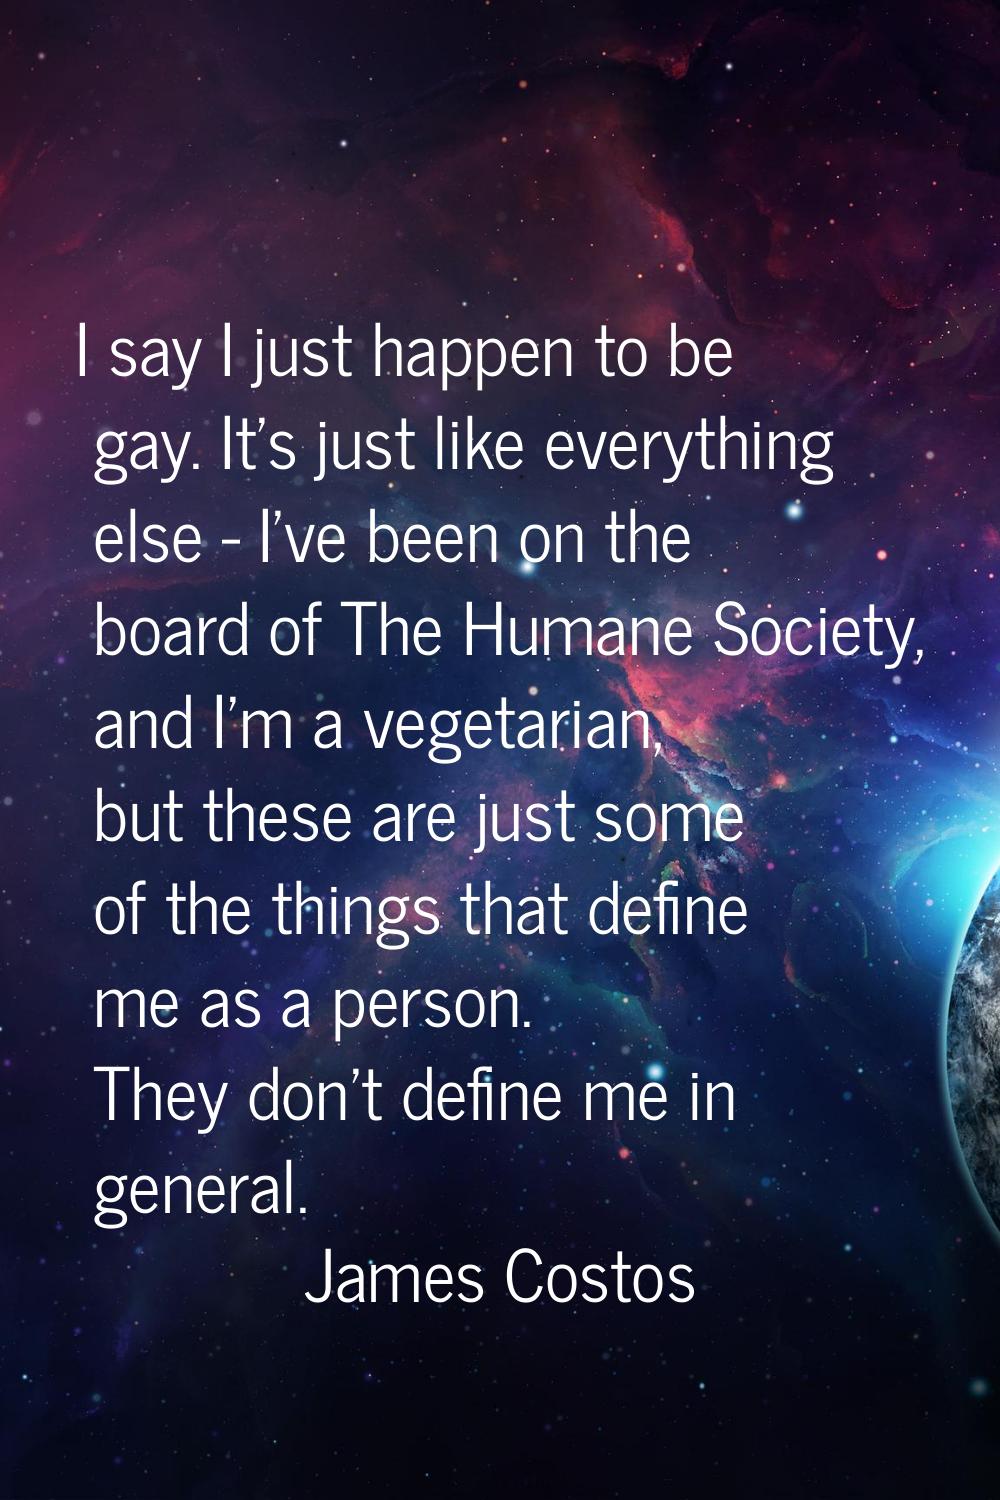 I say I just happen to be gay. It's just like everything else - I've been on the board of The Human